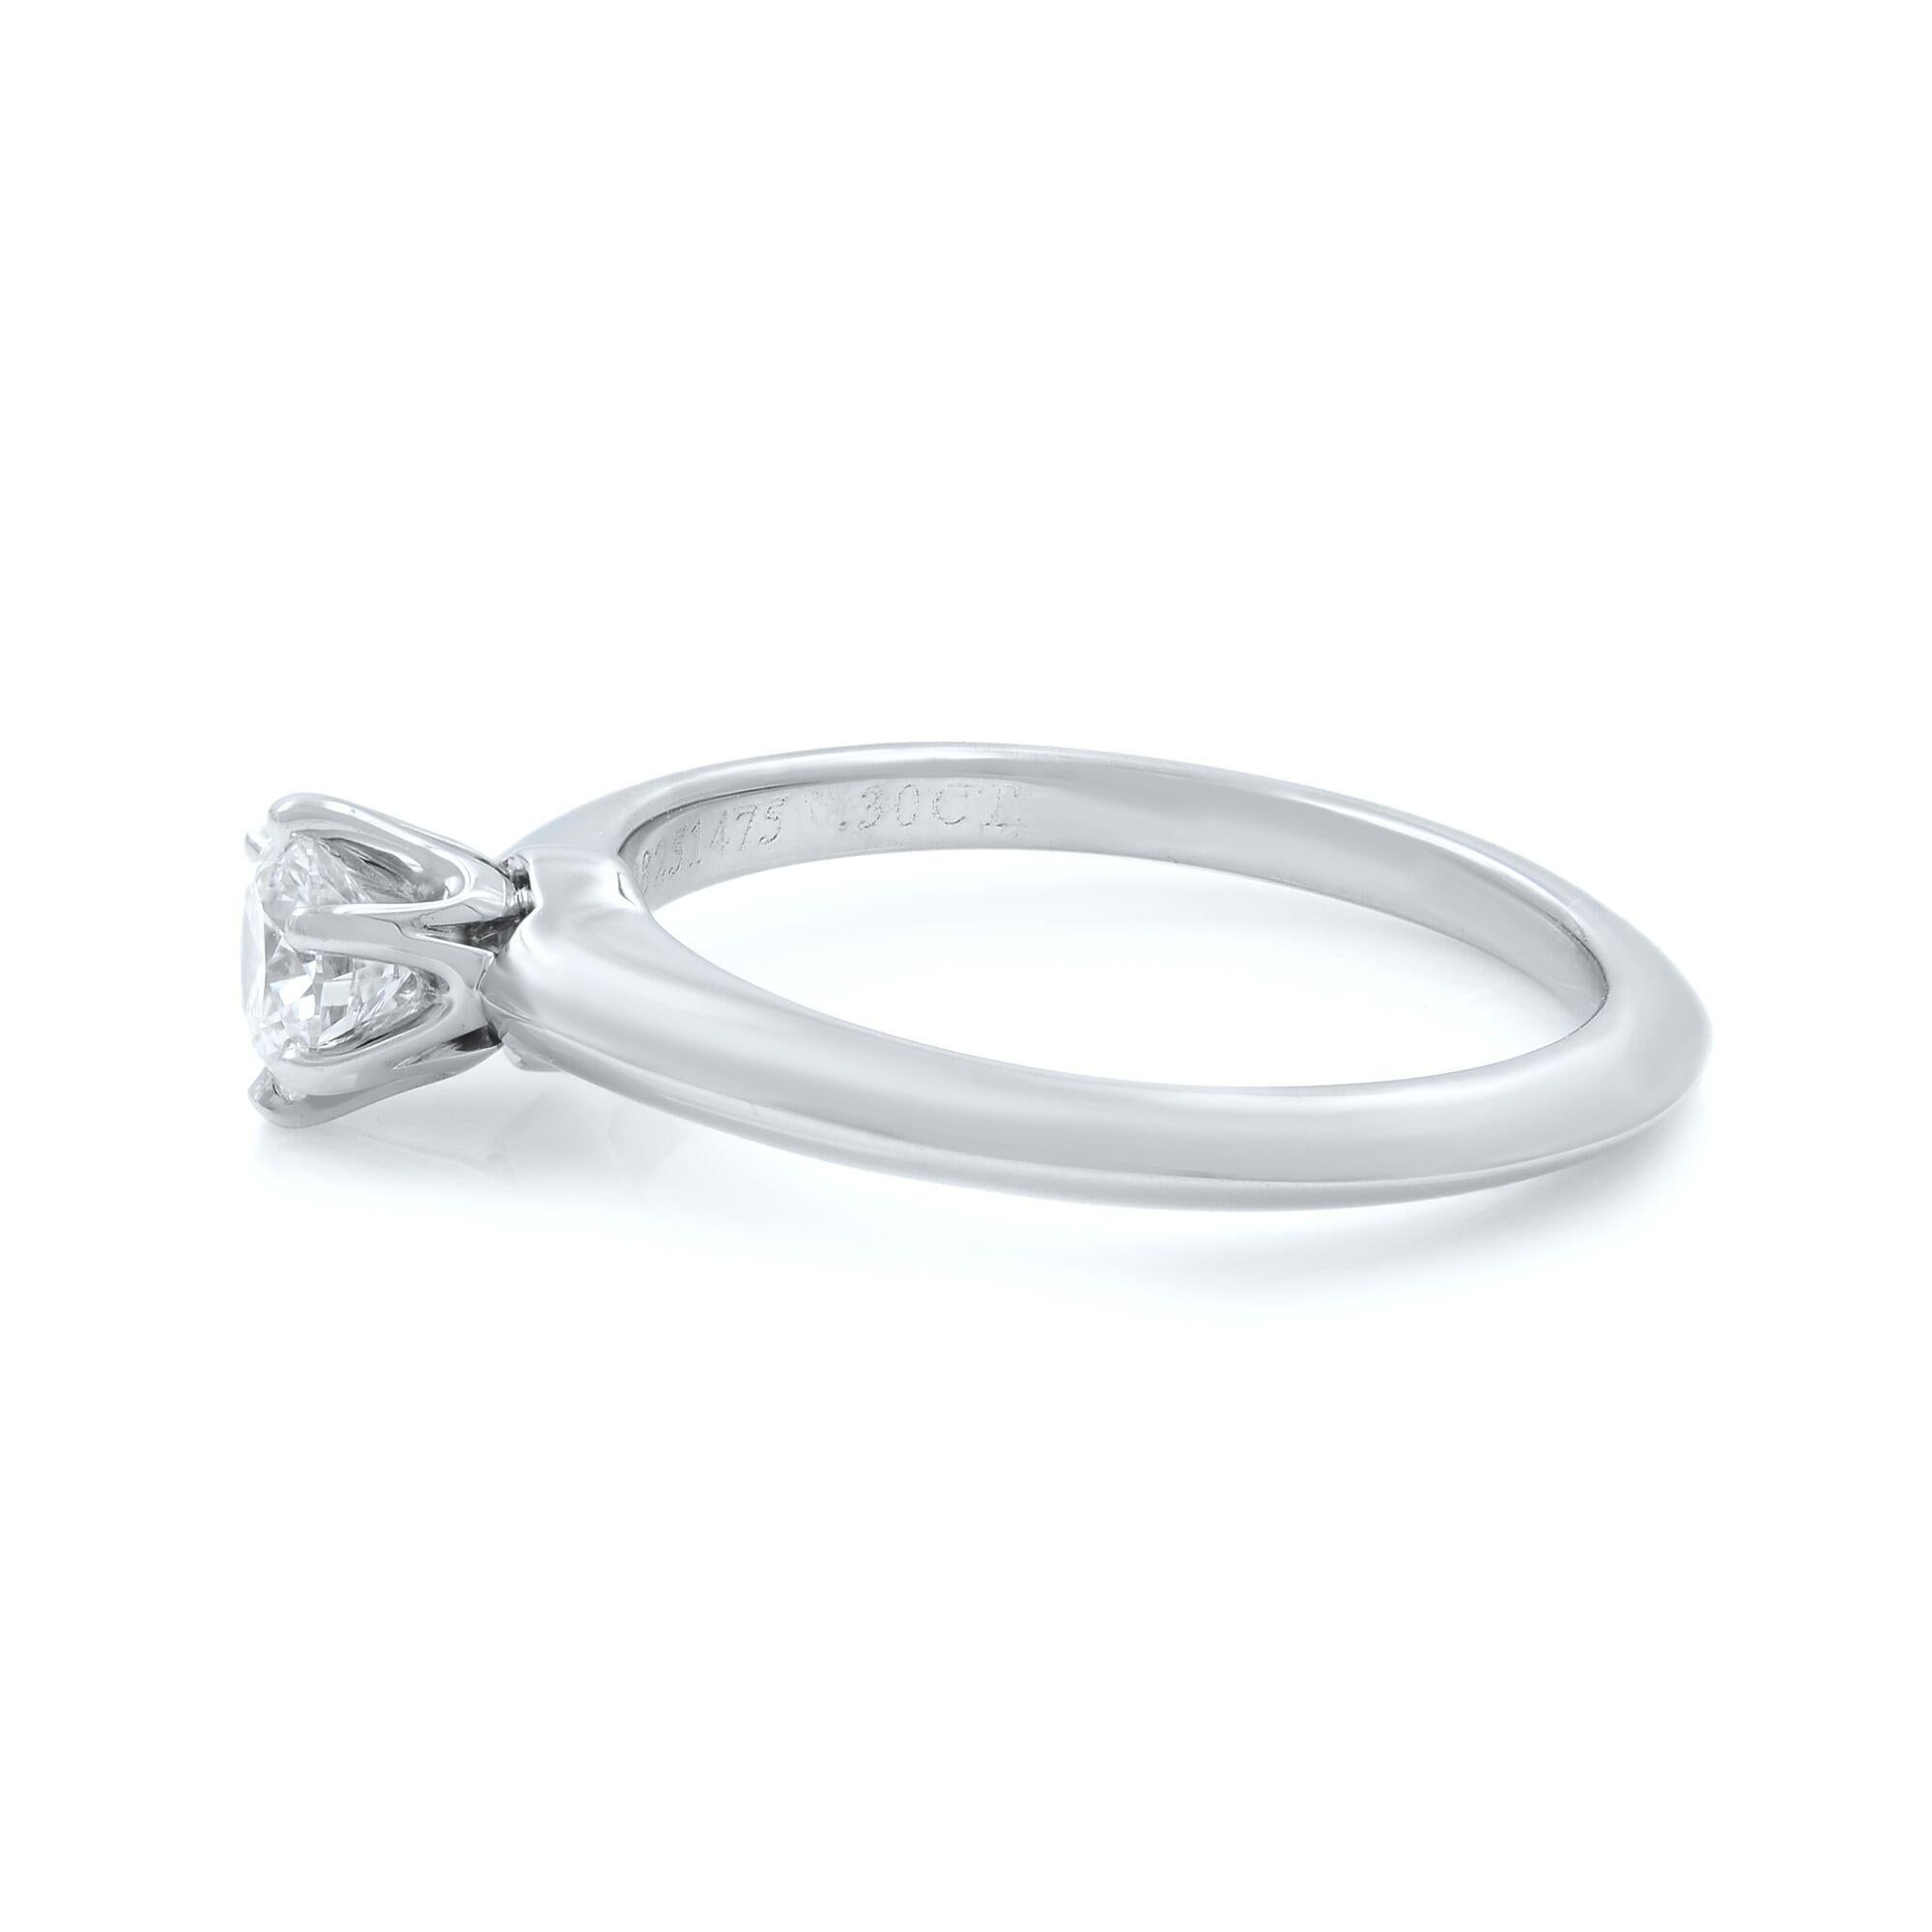 Tiffany & Co classic round cut solitaire diamond engagement ring crafted in platinum. This ring features prong set 0.30 carat of round brilliant cut diamond of G color and VS2 clarity. Hallmarked Tiffany & Co. Ring size 4. Can be resized at